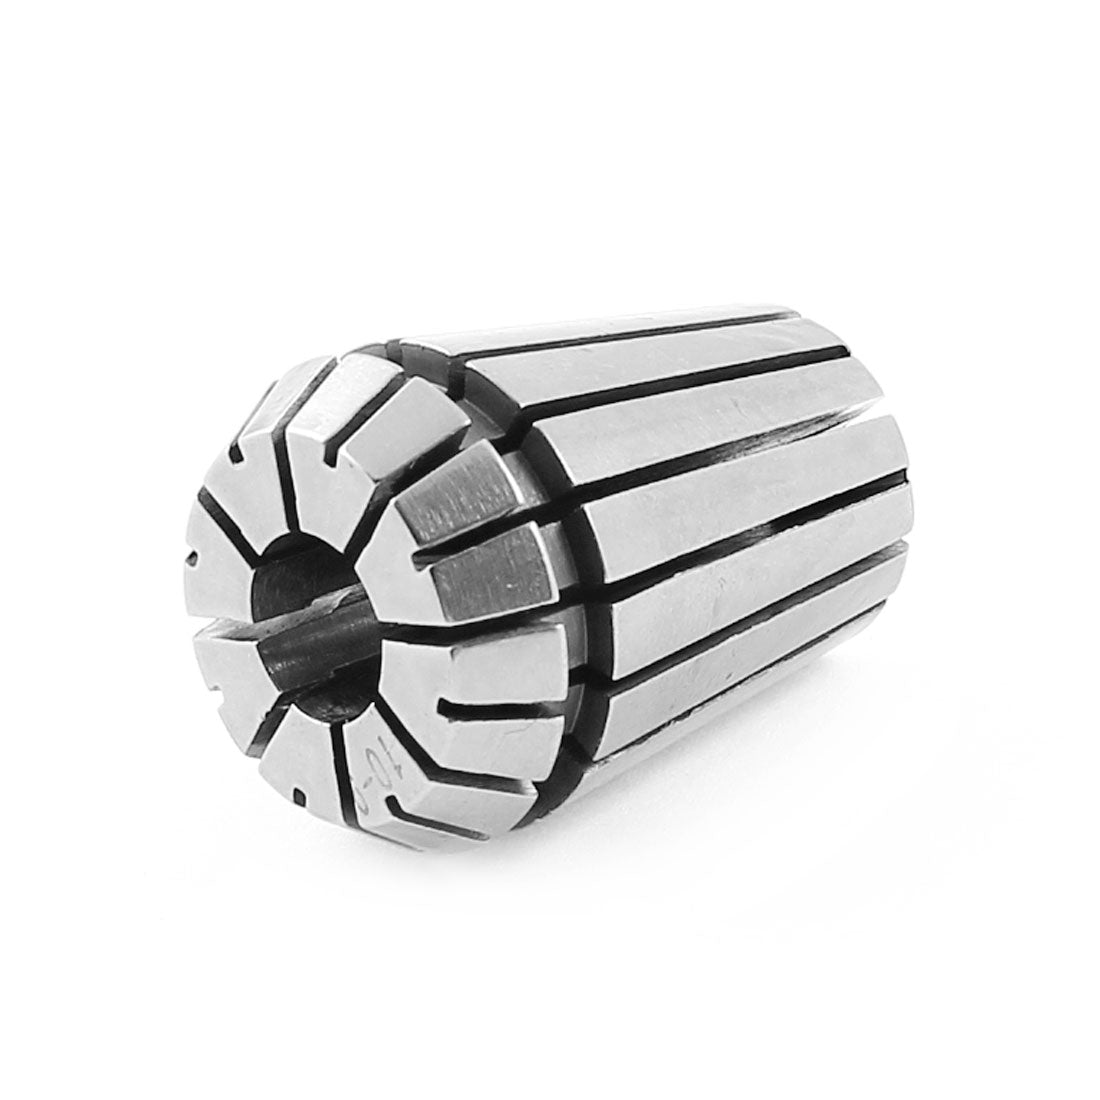 uxcell Uxcell ER25 10mm-9mm Clamping Range Stainless Steel Spring Collet for CNC Chuck Milling Lathe